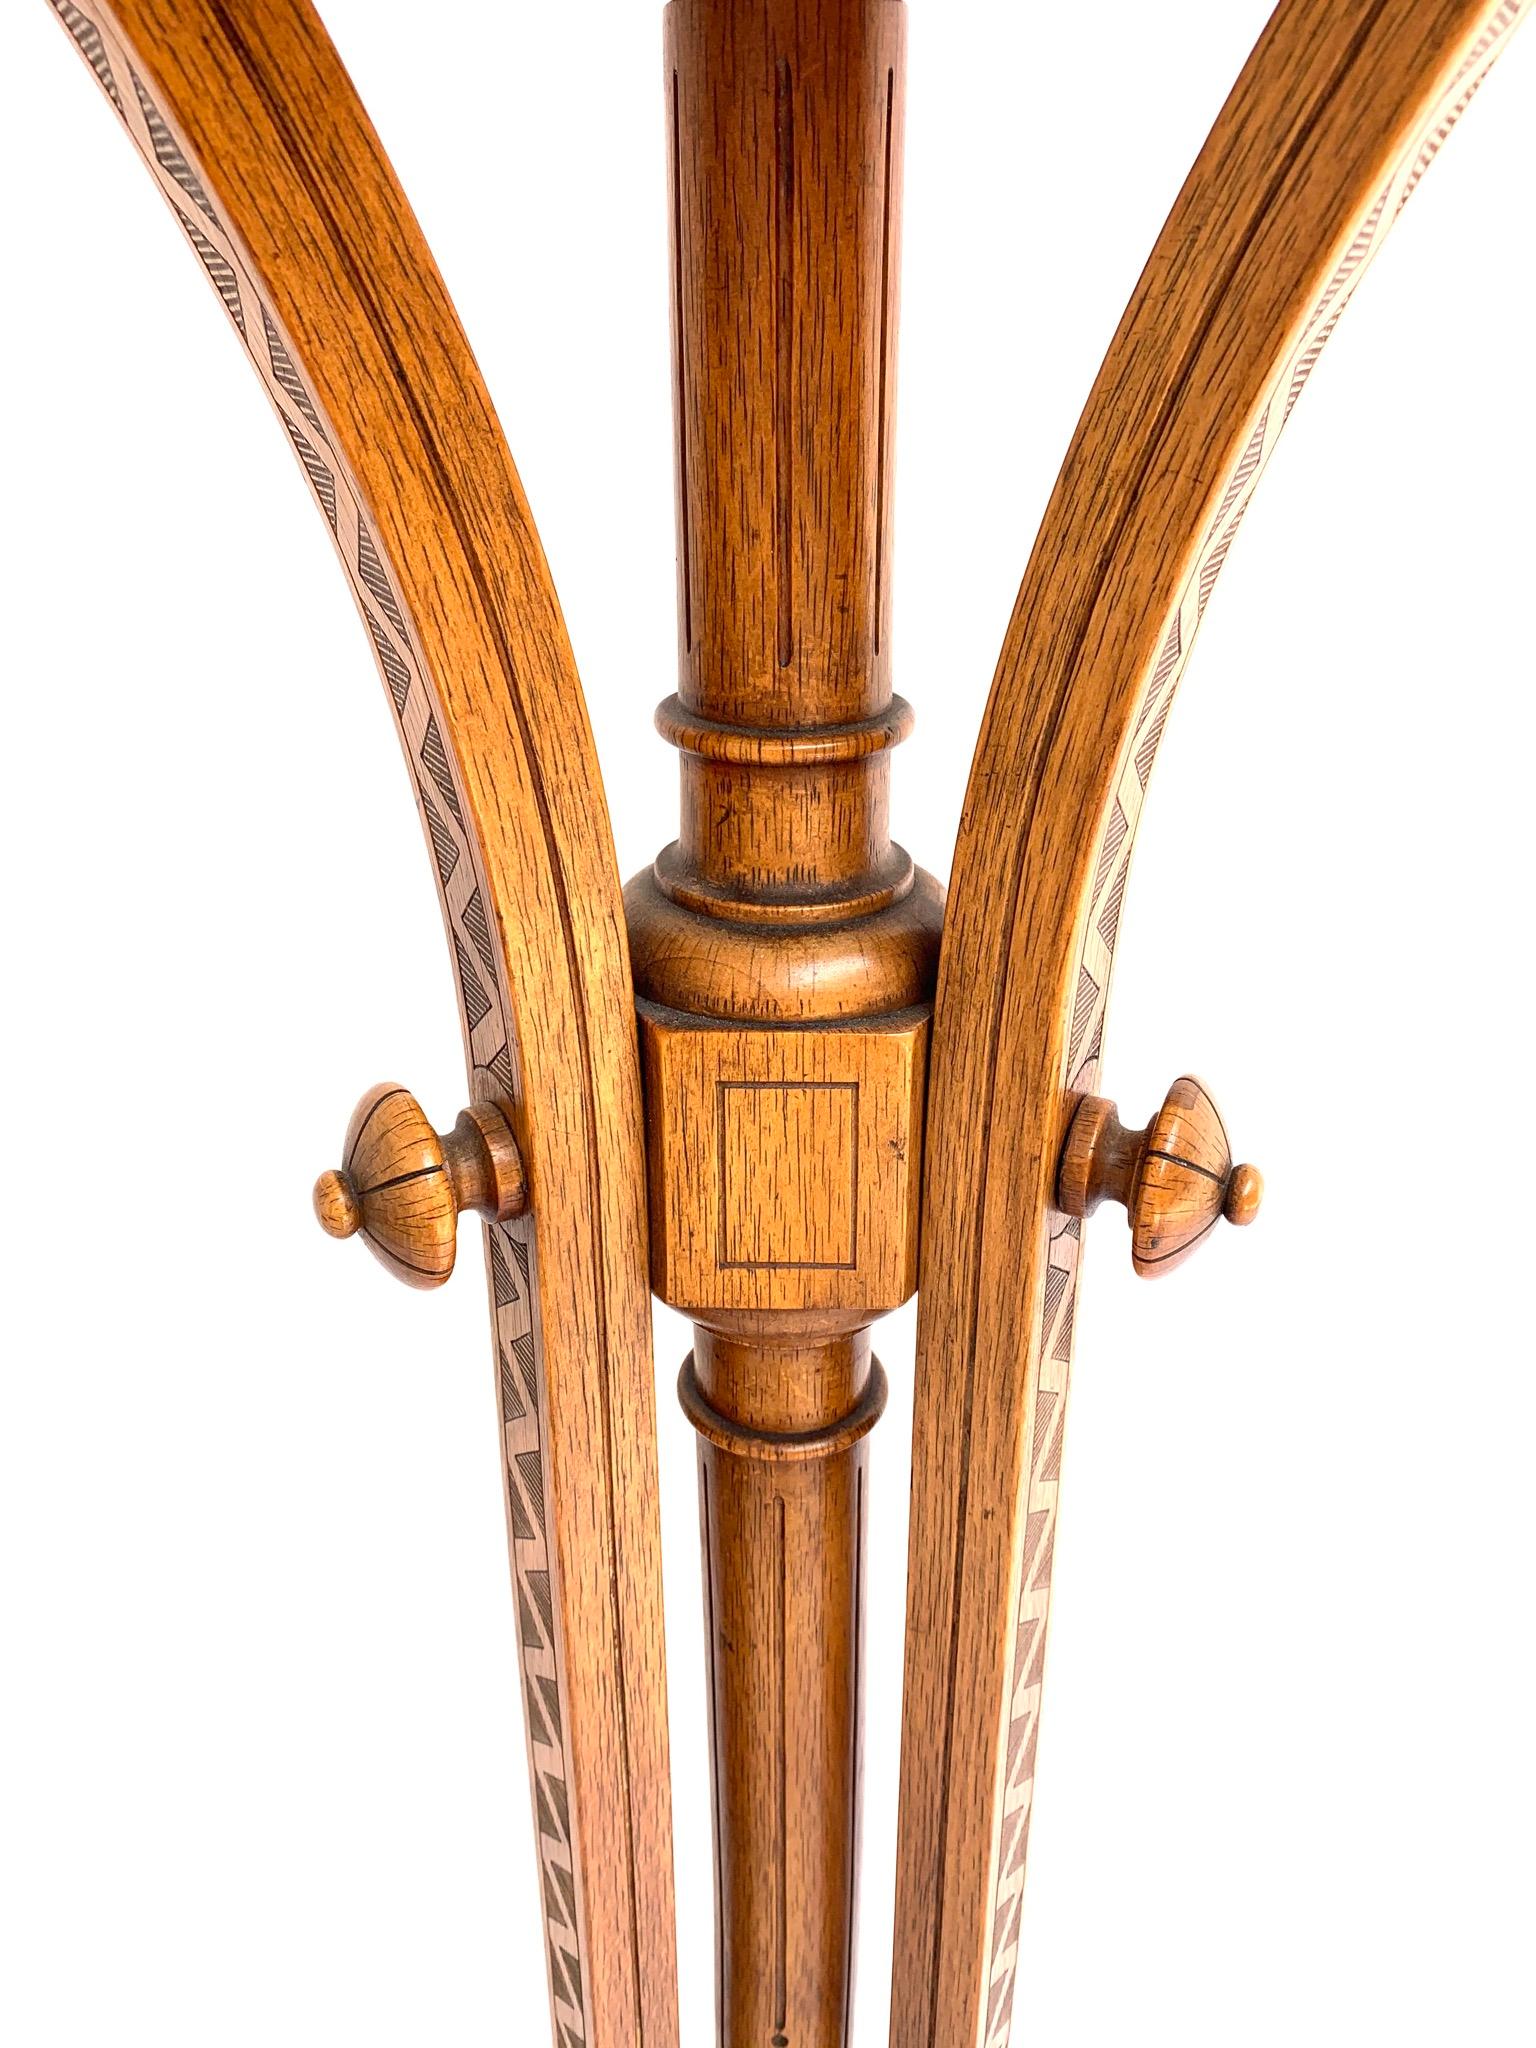 Hand-Crafted Striking & Top Quality Made Bentwood Vienne Secession Pedestal / Sculpture Stand